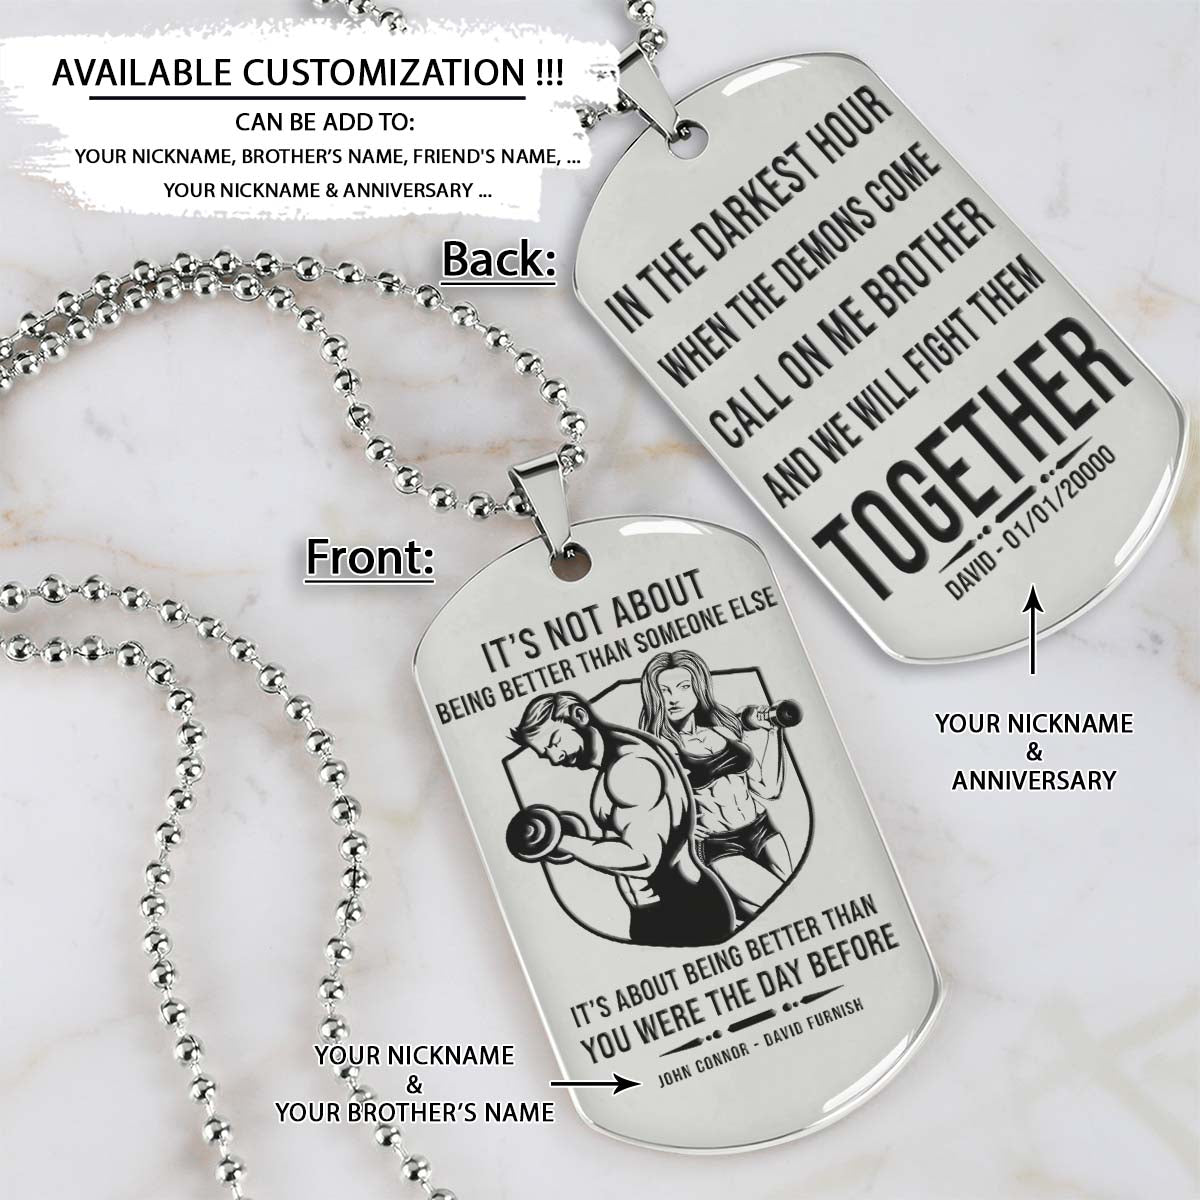 GYMD013 - Call On Me Brother - It's About Being Better Than You Were The Day Before - Gym - Fitness Center - Workout - Gym Dog Tag - Gym Necklace - Silver Engrave Dog Tag